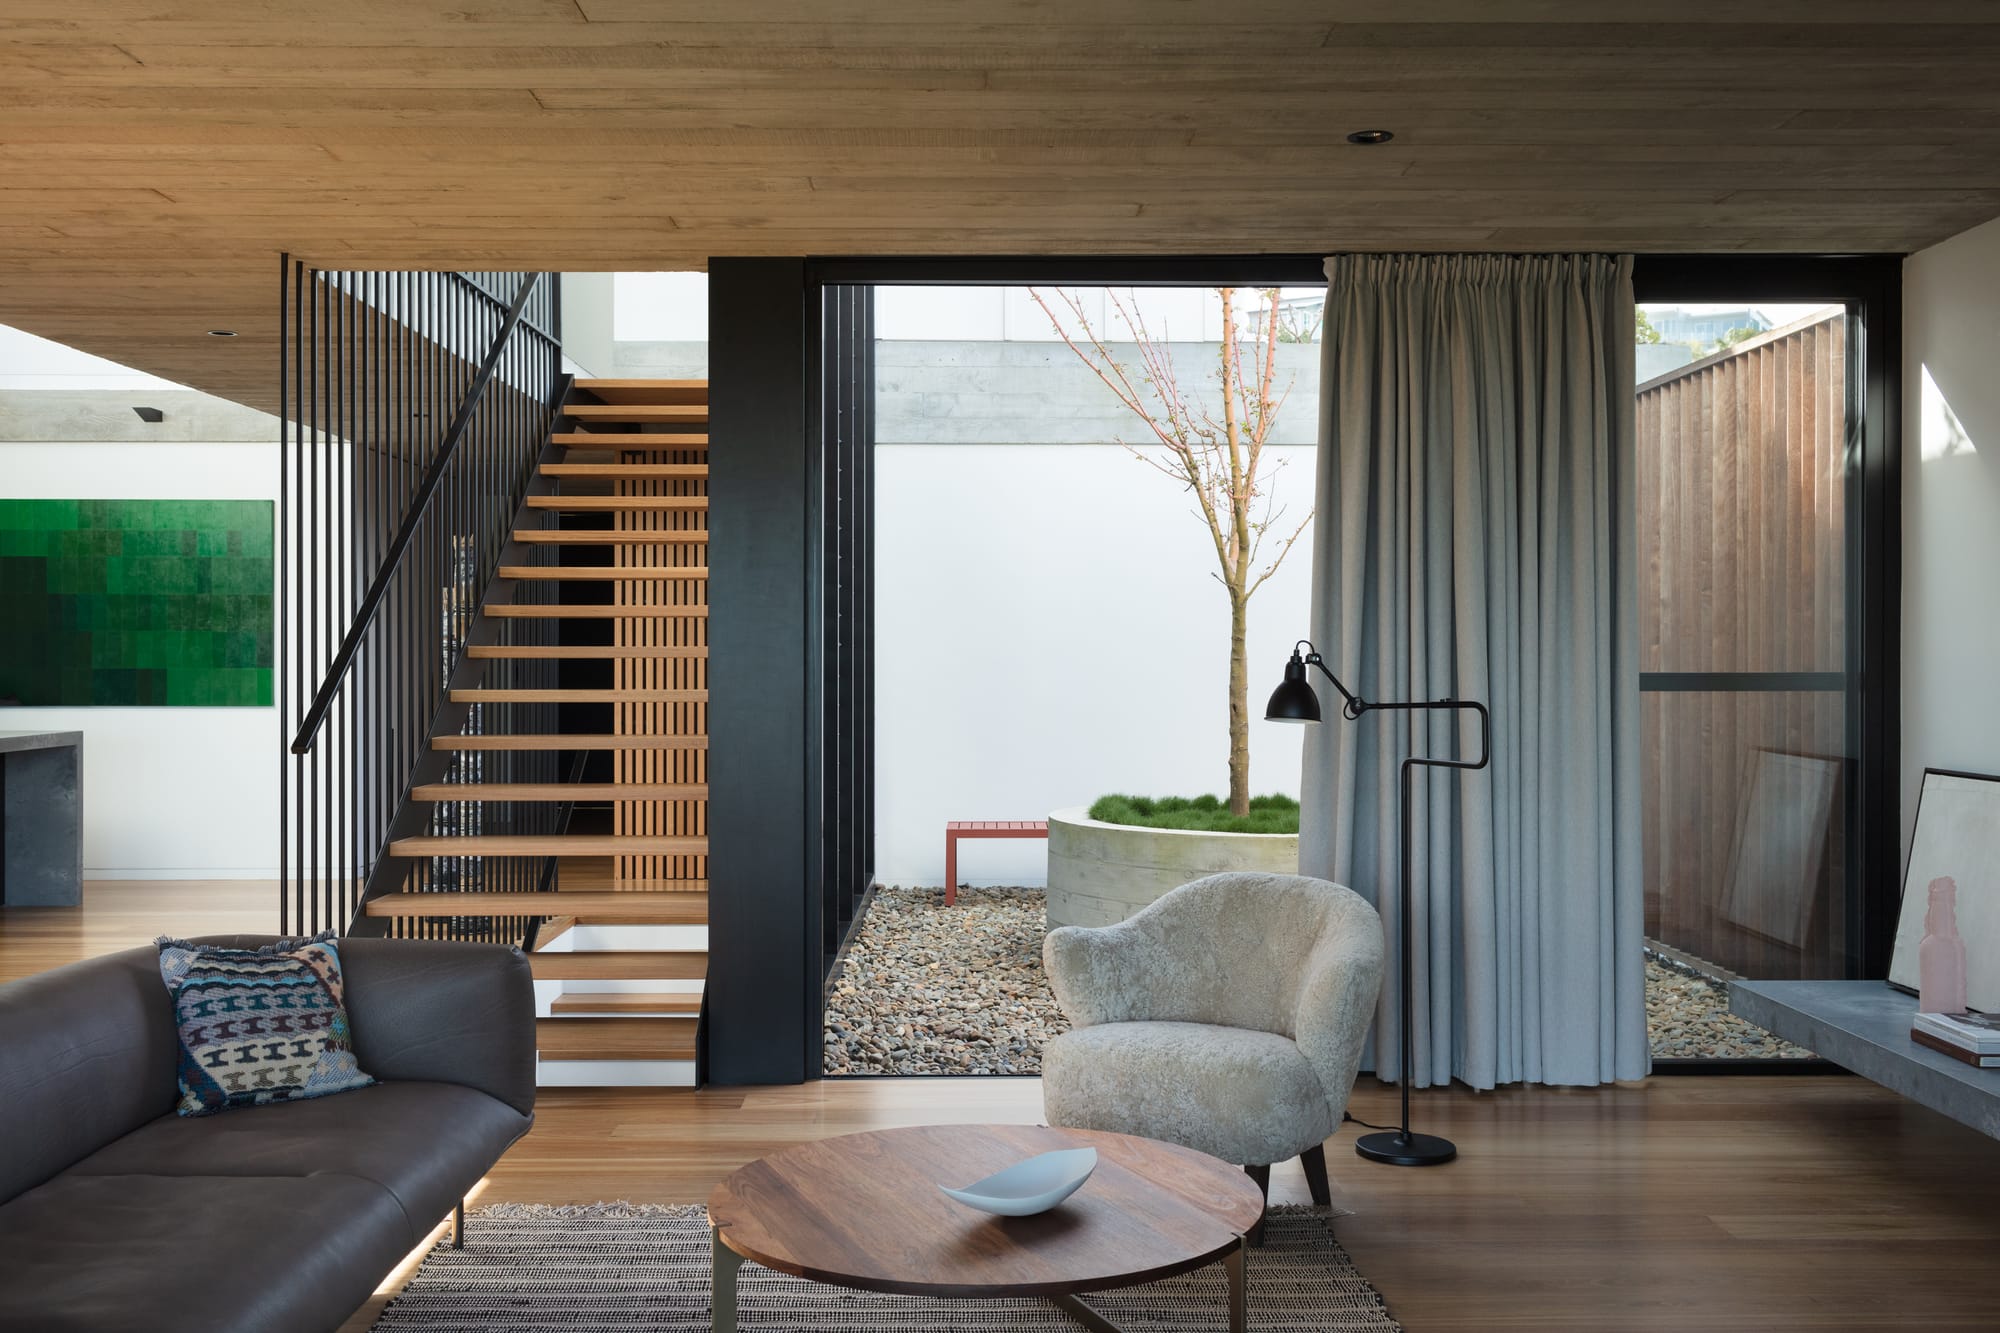 Grandview House by Ian Bennett Design Studio. Photography by Clinton Weaver. Living space with timber floors and staircase, with black balustrade. Pebble floor courtyard in background. 